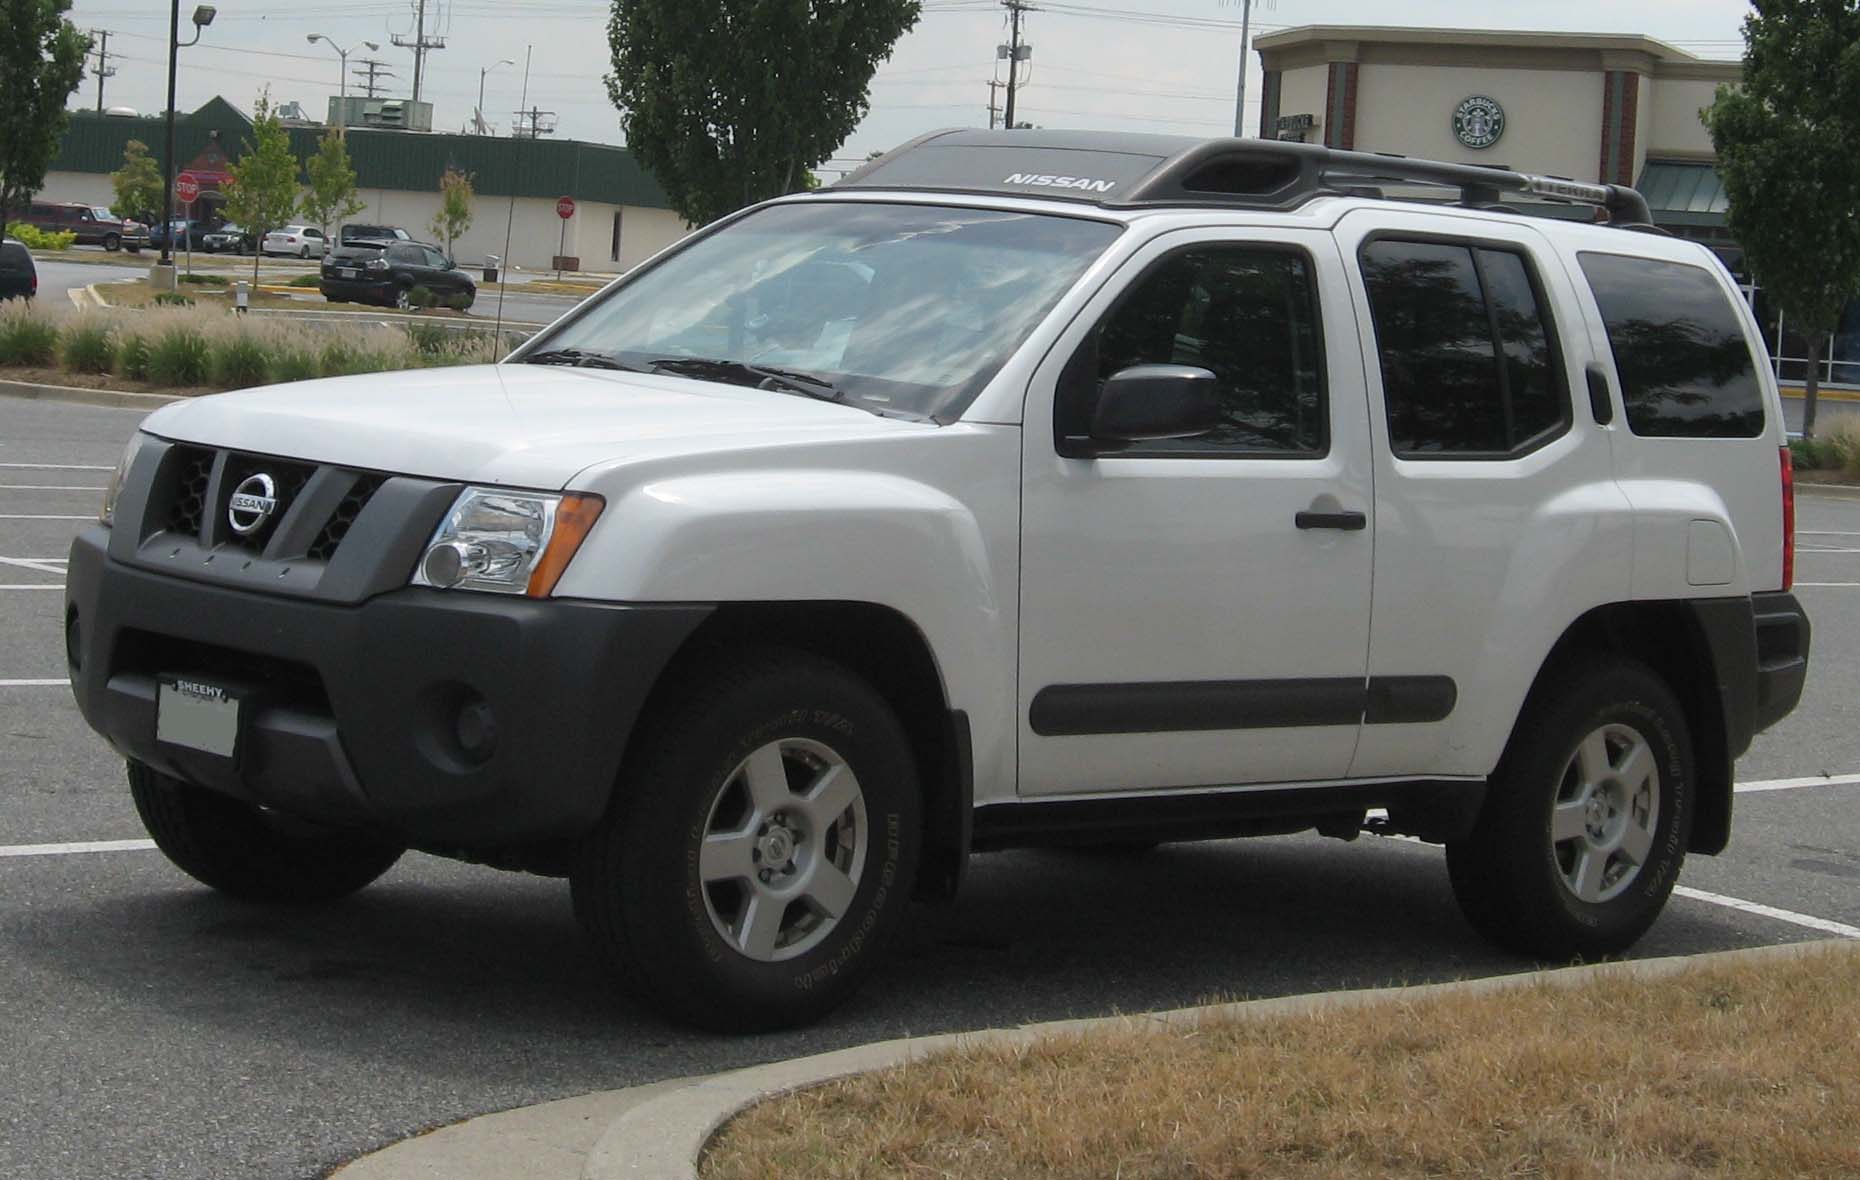 What is the towing capacity of a 2007 nissan xterra #9